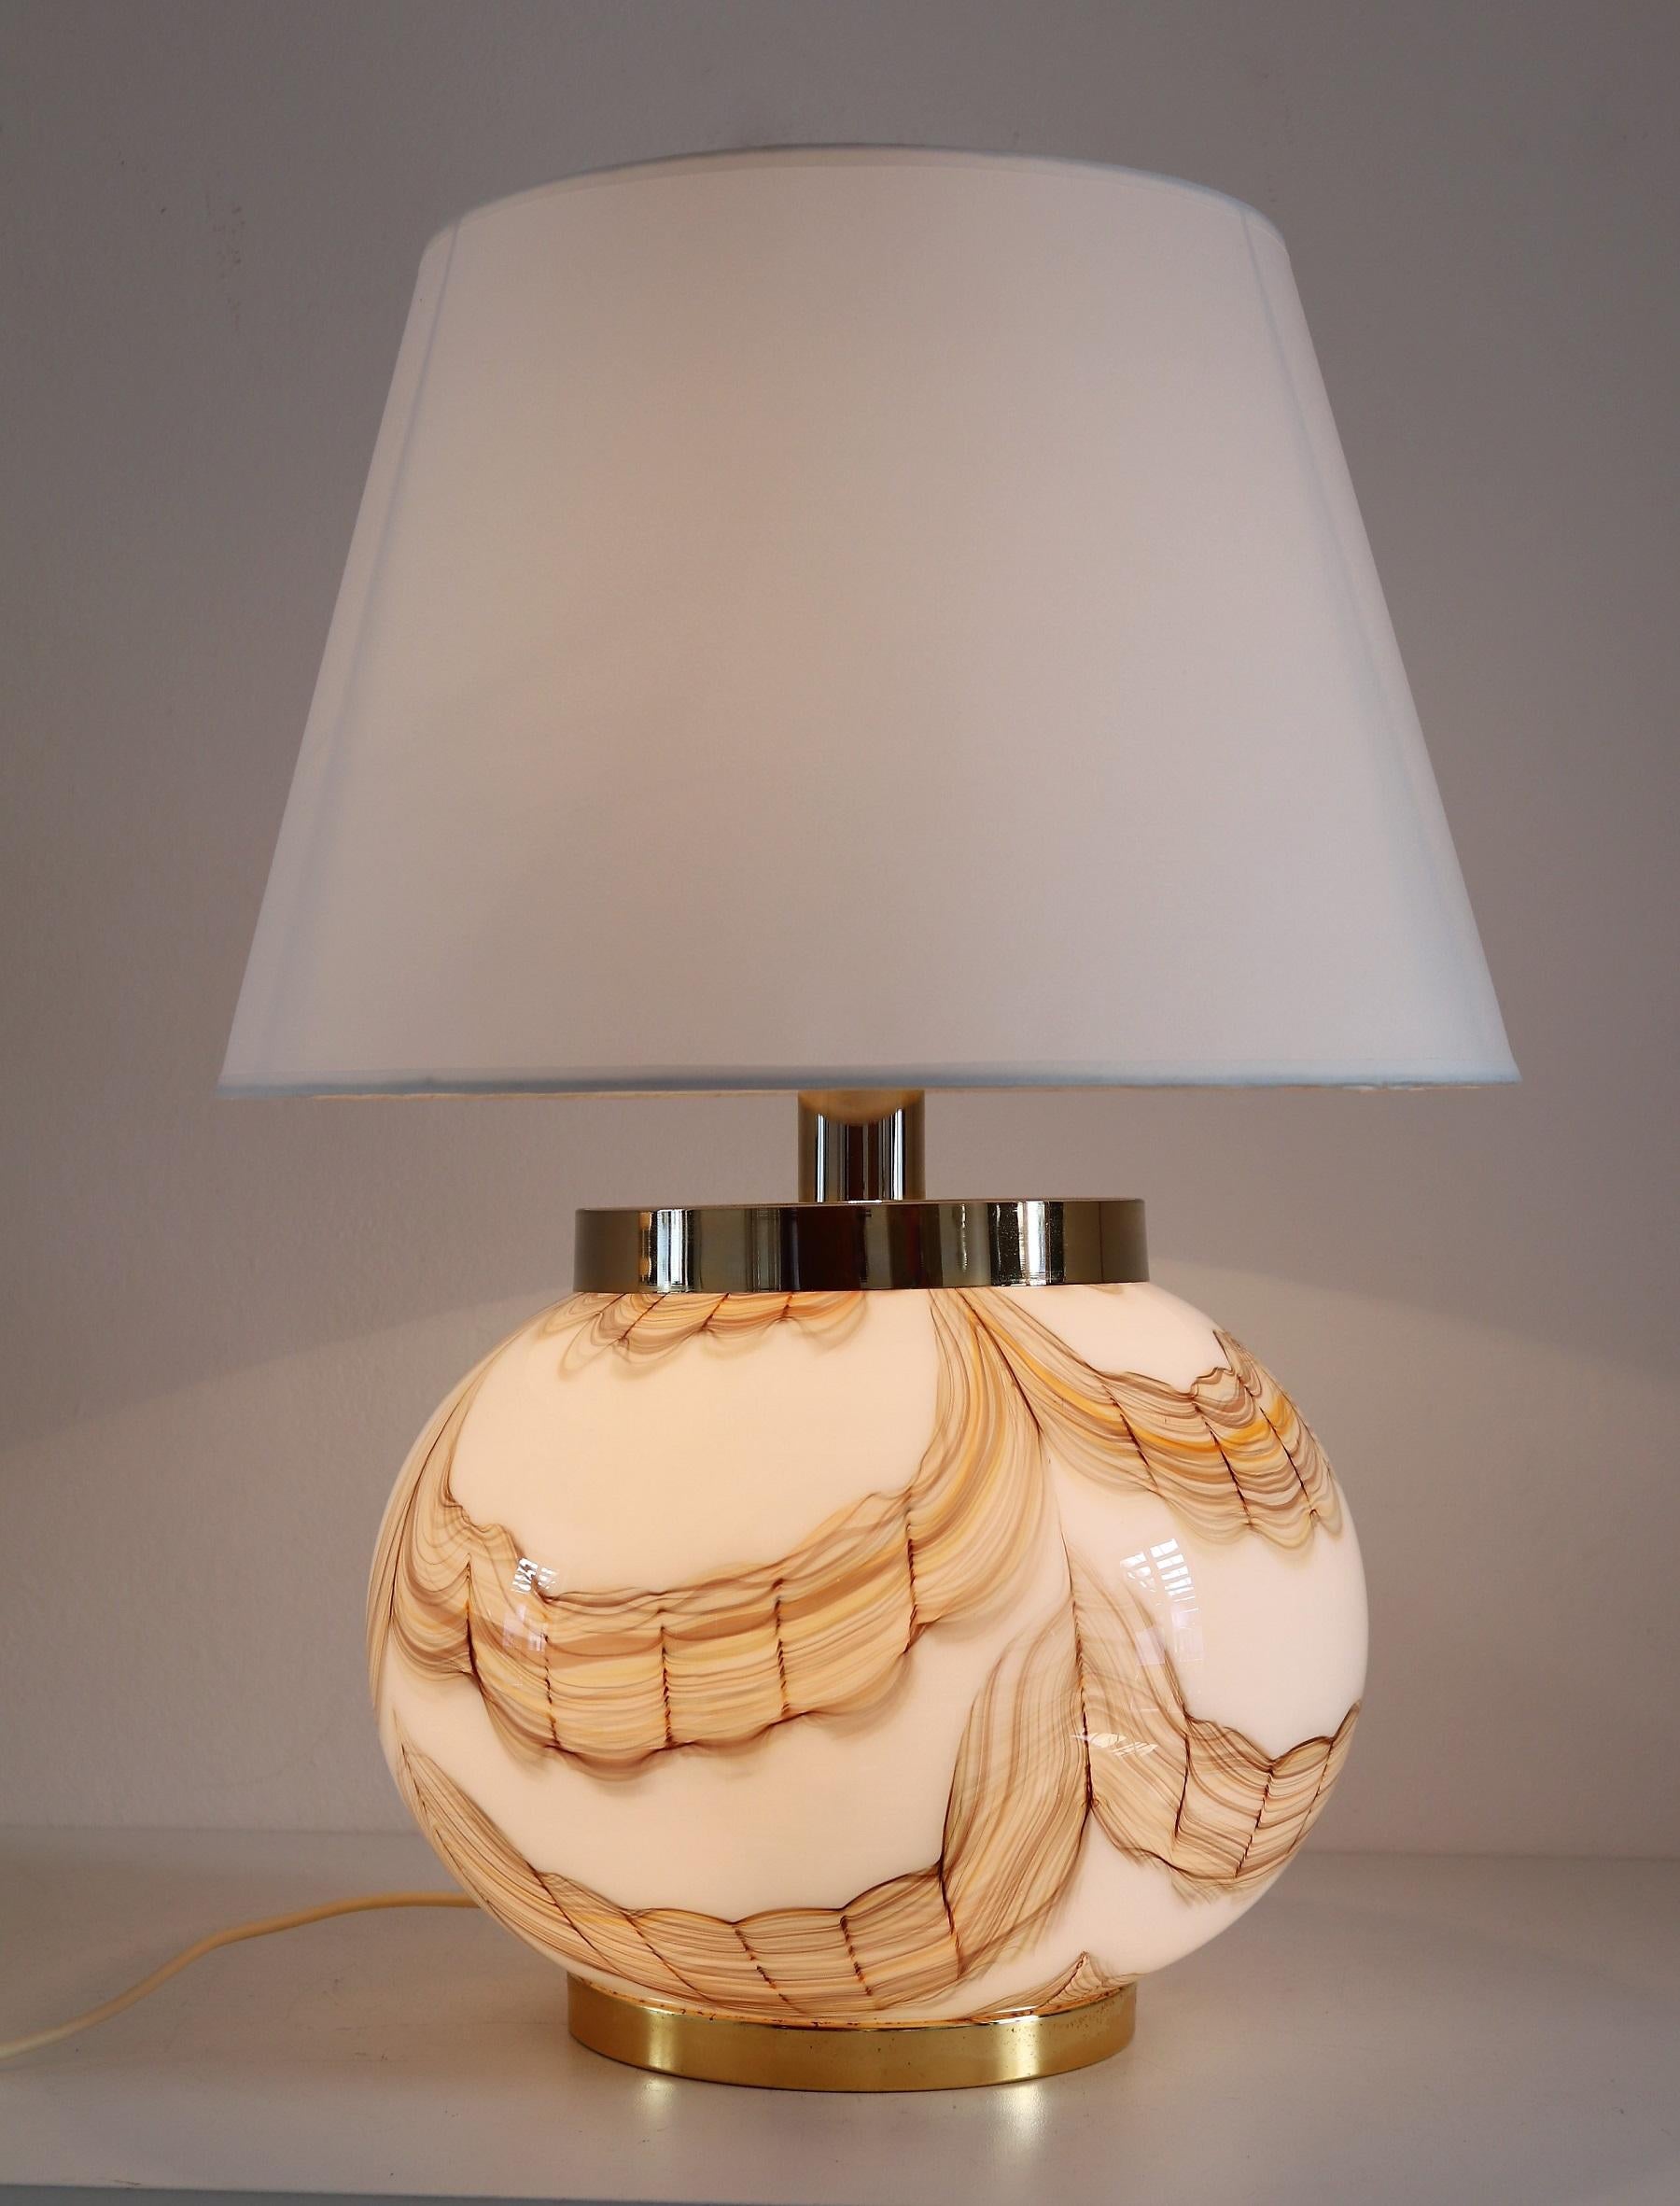 Gorgeous Italian table lamp with big Murano glass sphere base and golden metal details.
Made in Murano in the 1970s.
The glass is stunning to see with its different color nuances from different browns over orange to yellow.
The lamp has four